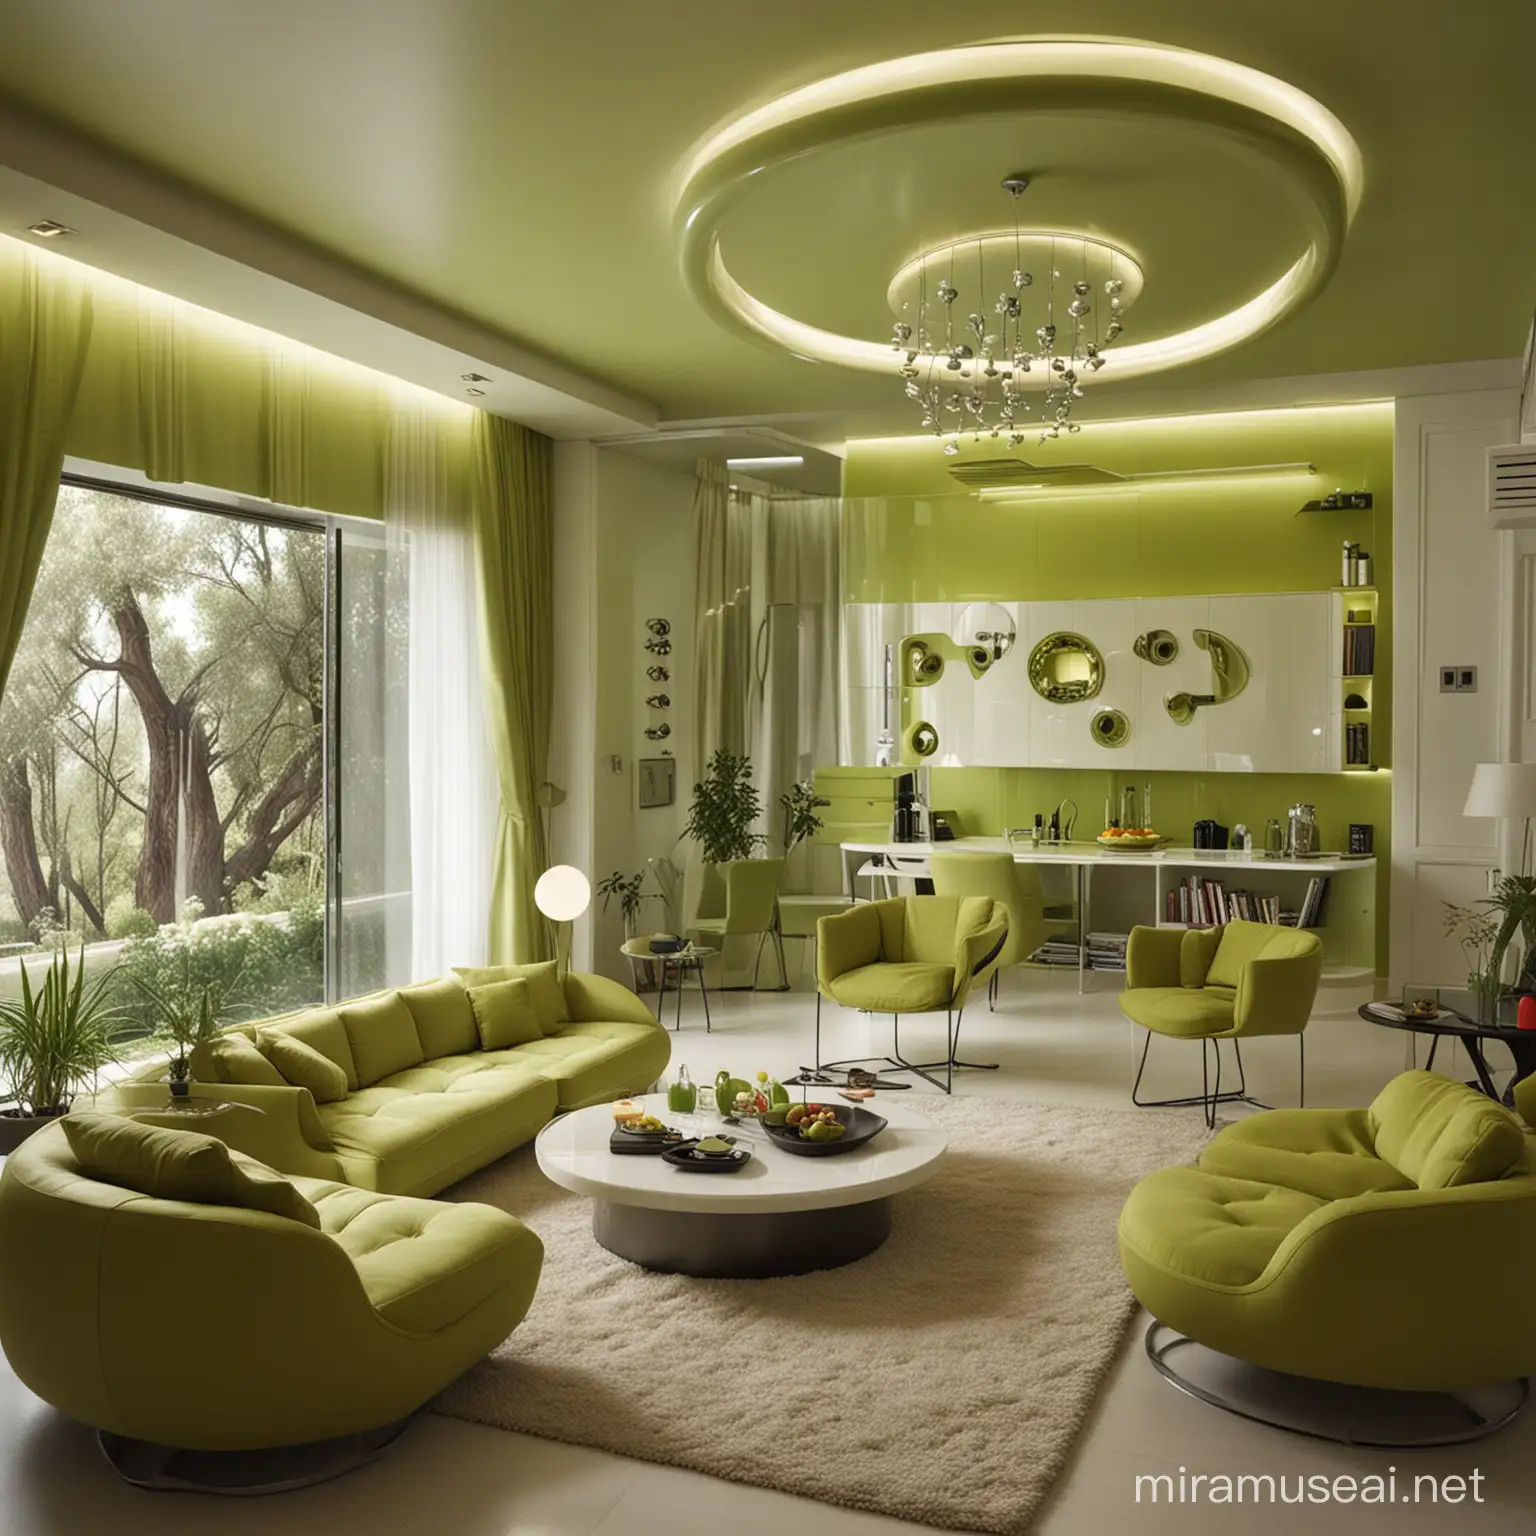 Living room designed for the year 2090,green olives and entree